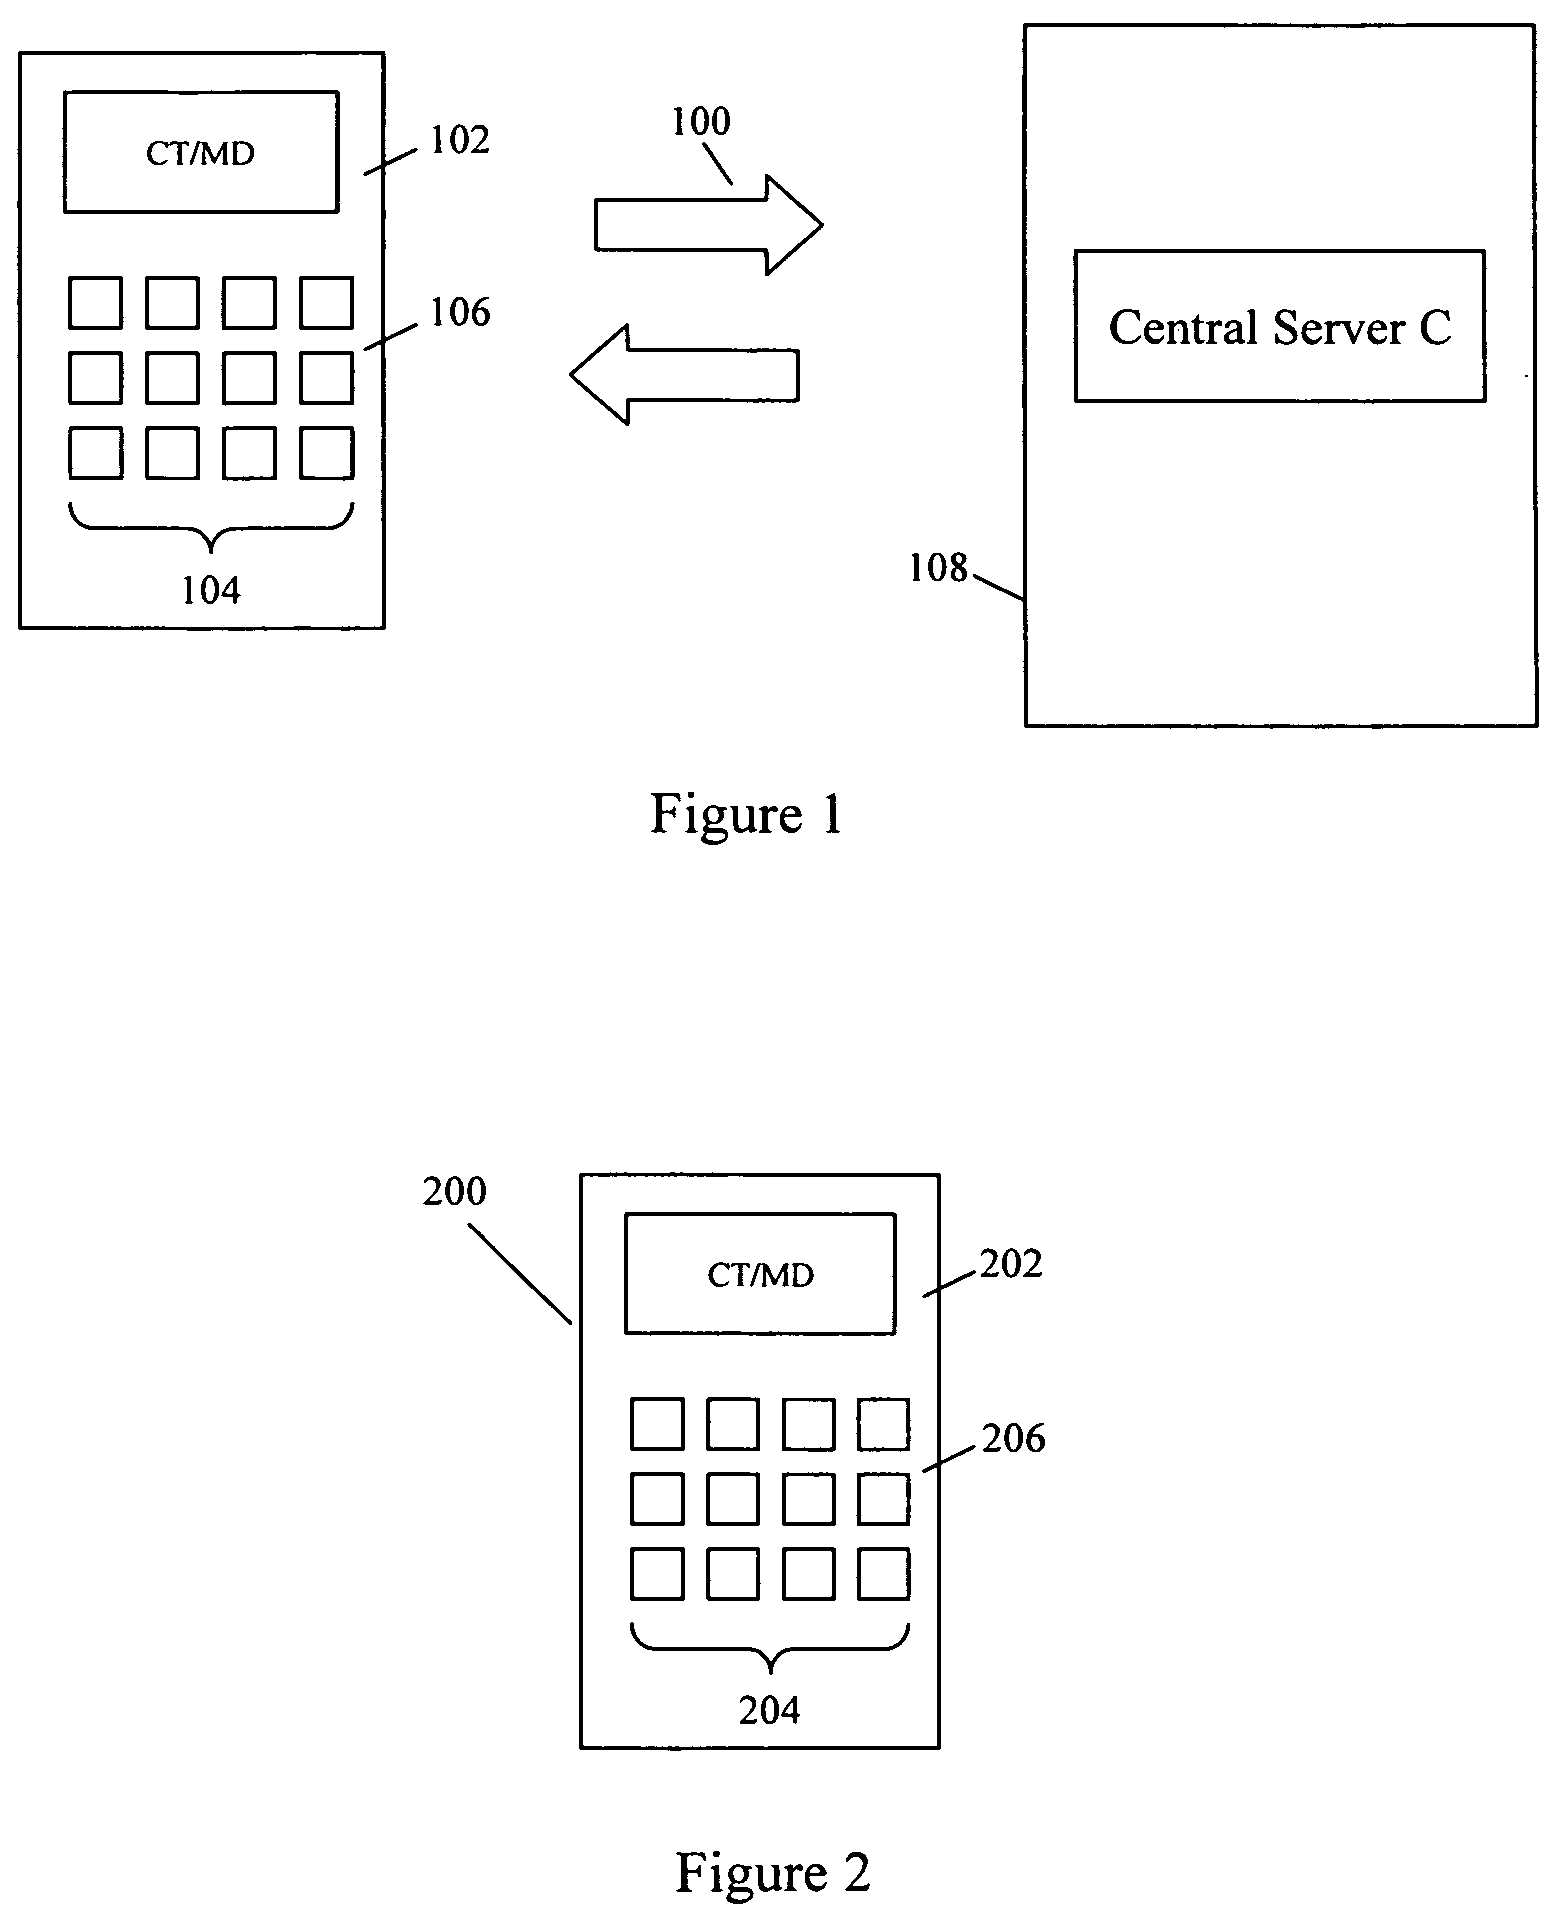 Configurable interface for devices